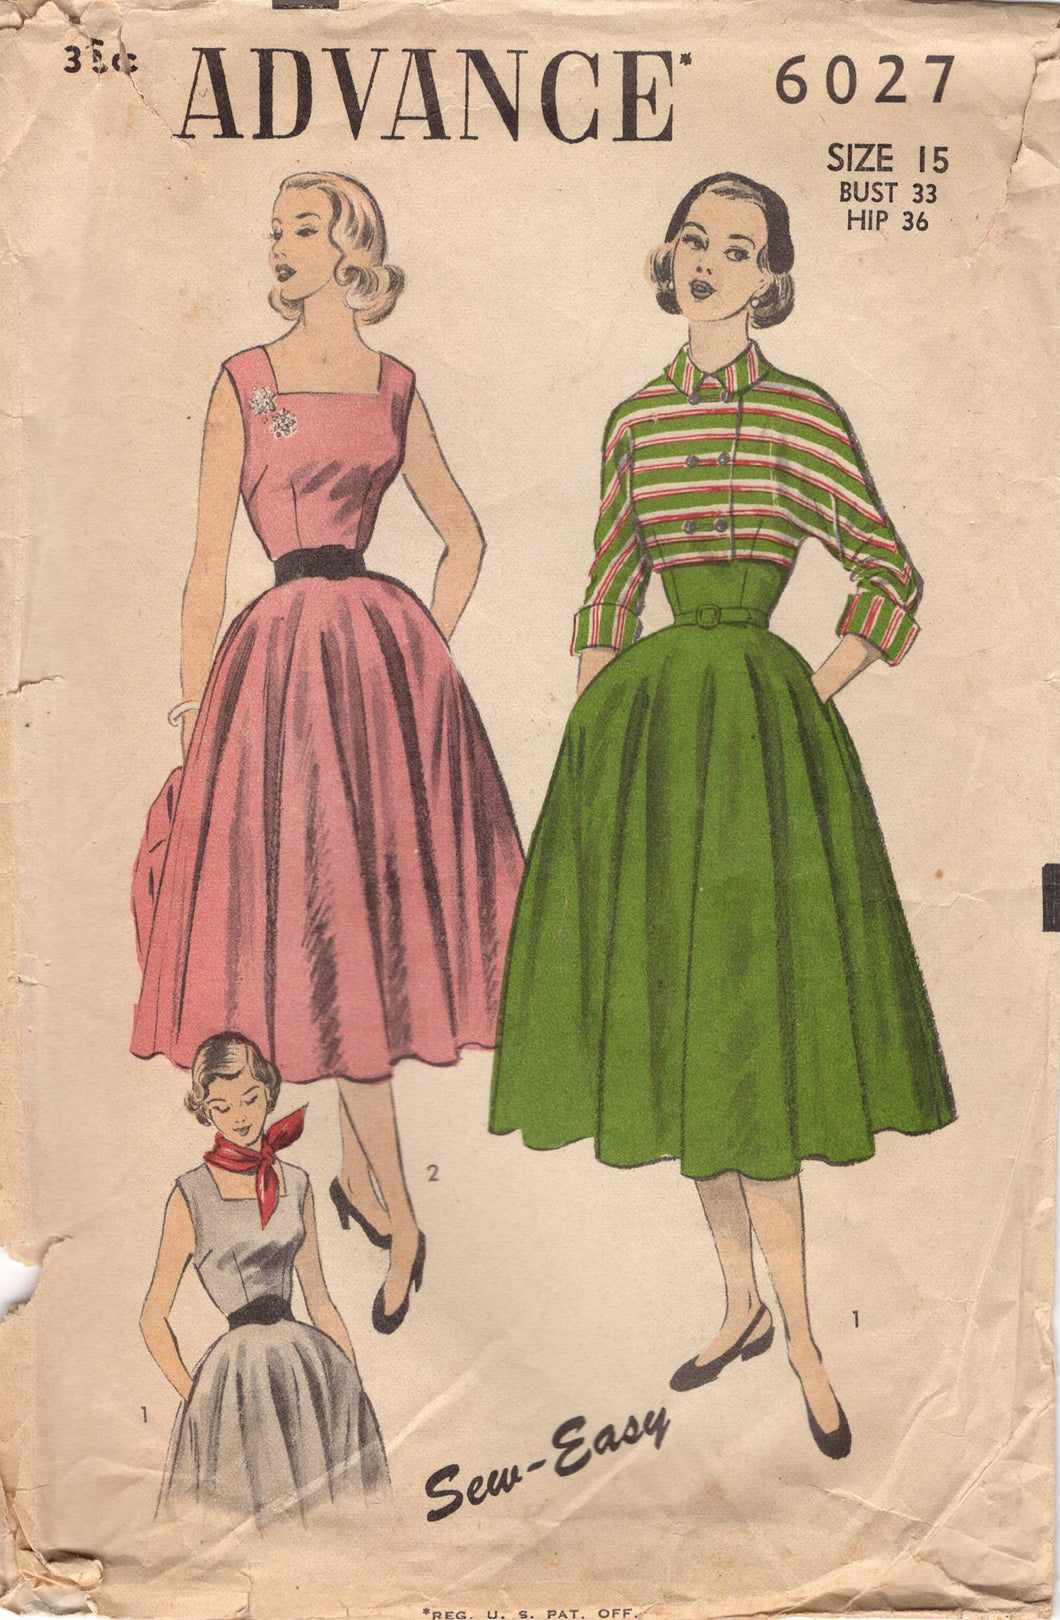 1950's Advance Fit and Flare Dress Pattern with Square Neckline and Double Breasted Crop Bolero Jacket - Bust 33